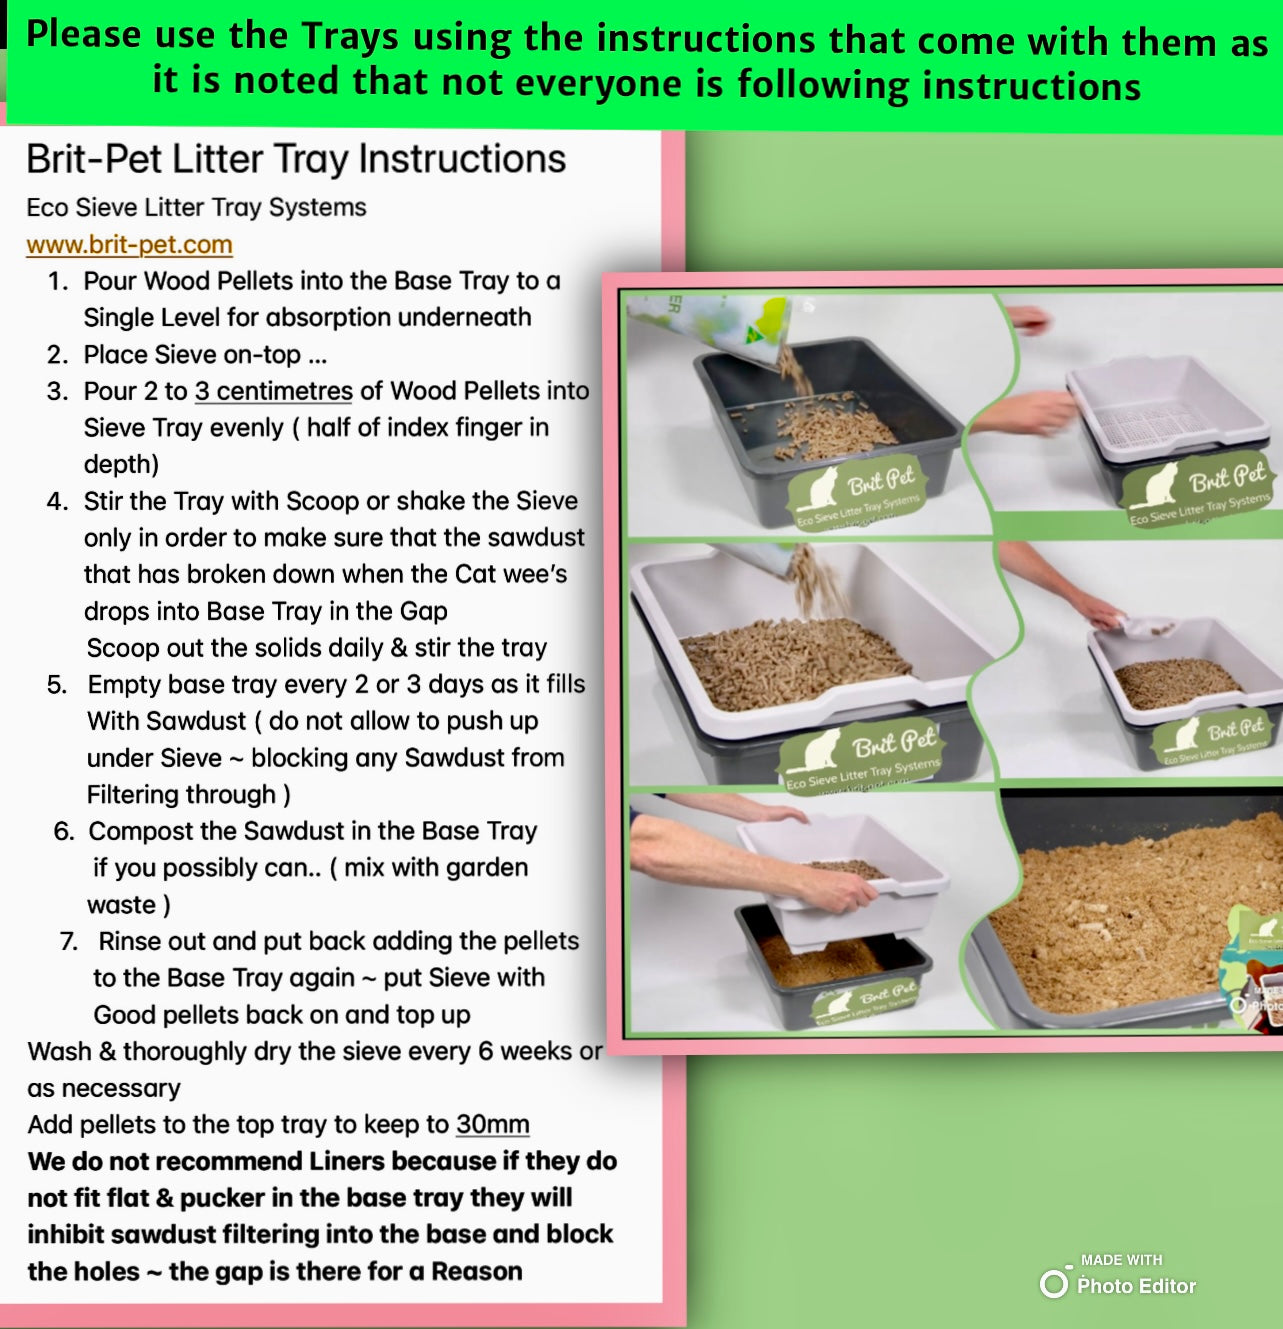 Litter Tray Instructions